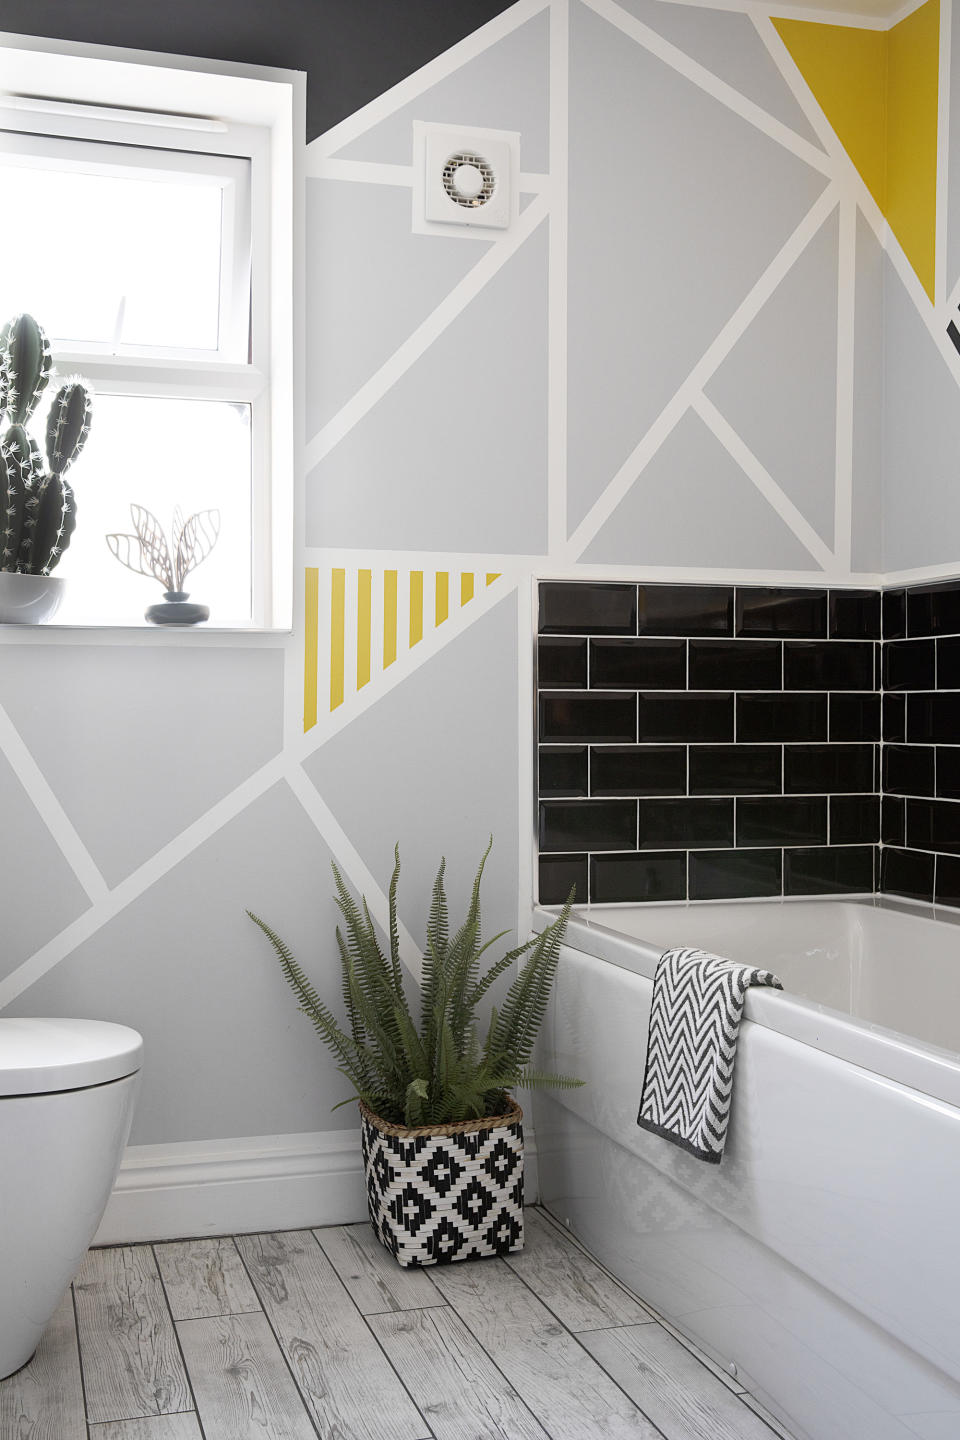 <p> You can create your own wallpaper effect with this really easy cheap bathroom idea. All you need is paint and thick masking tape. Create the geometric shapes with the masking tape and then paint in between the lines. Easy peasy. </p>